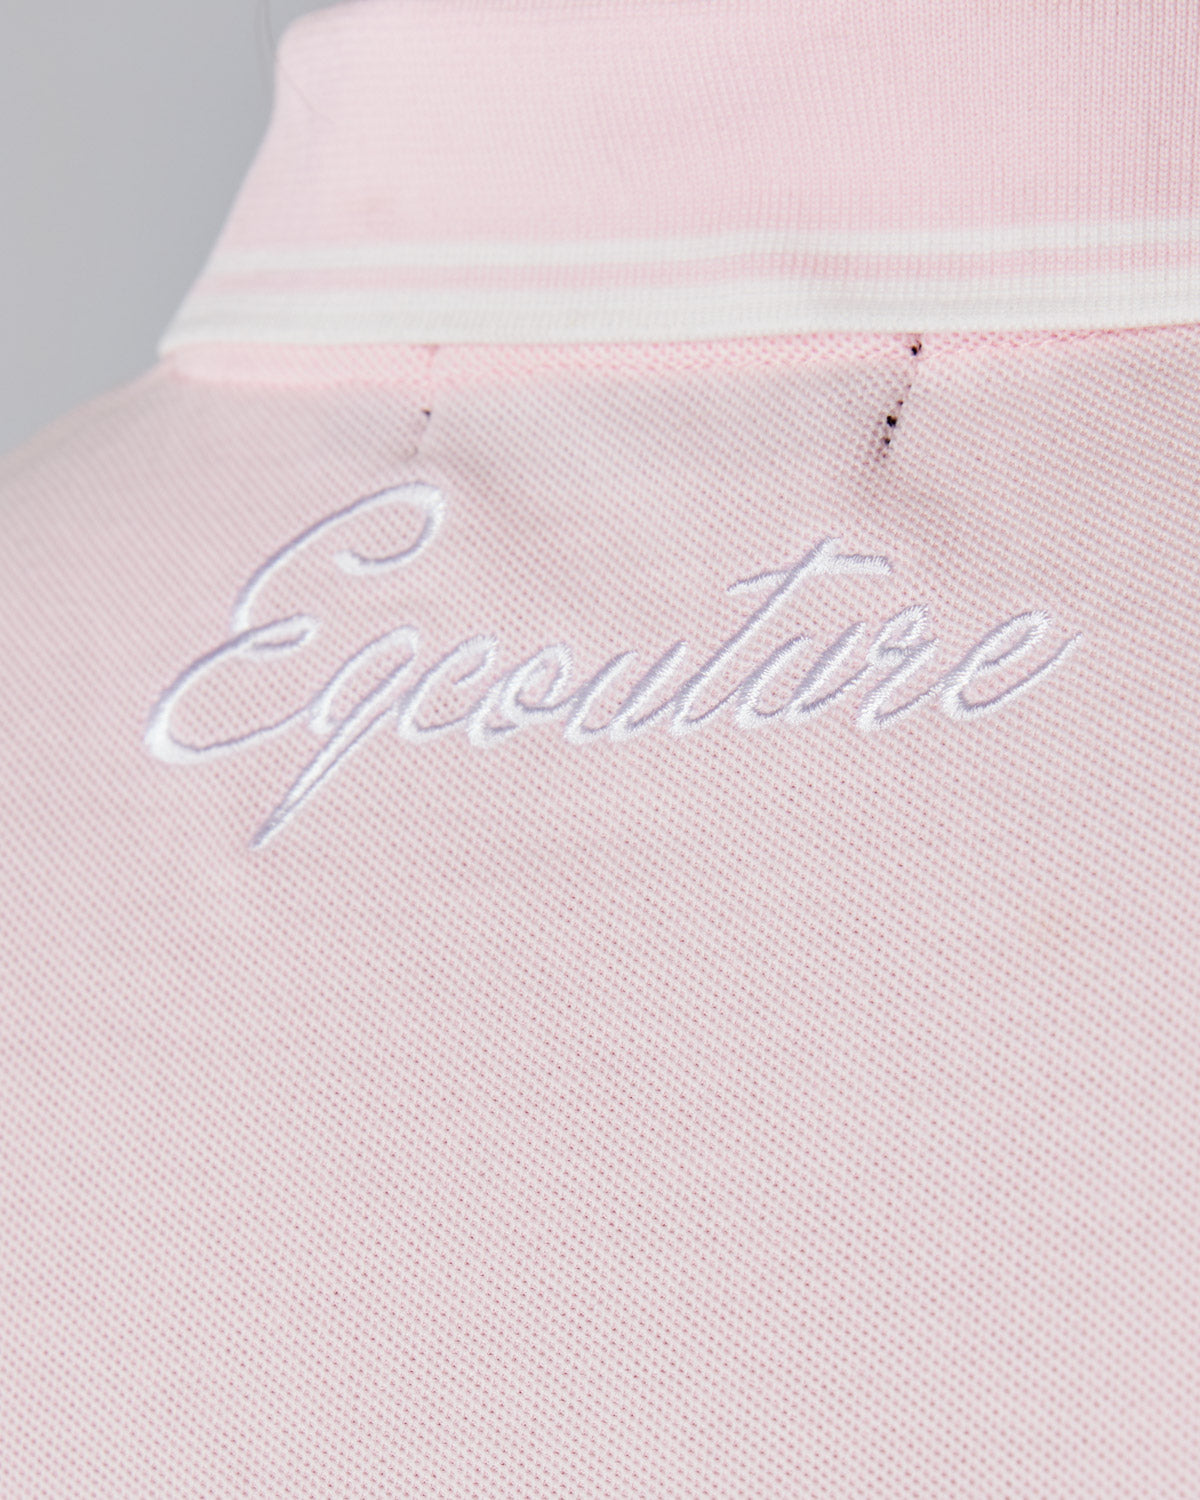 Equestrian pink short sleeve polo top. Tapered, fitted classic polo.